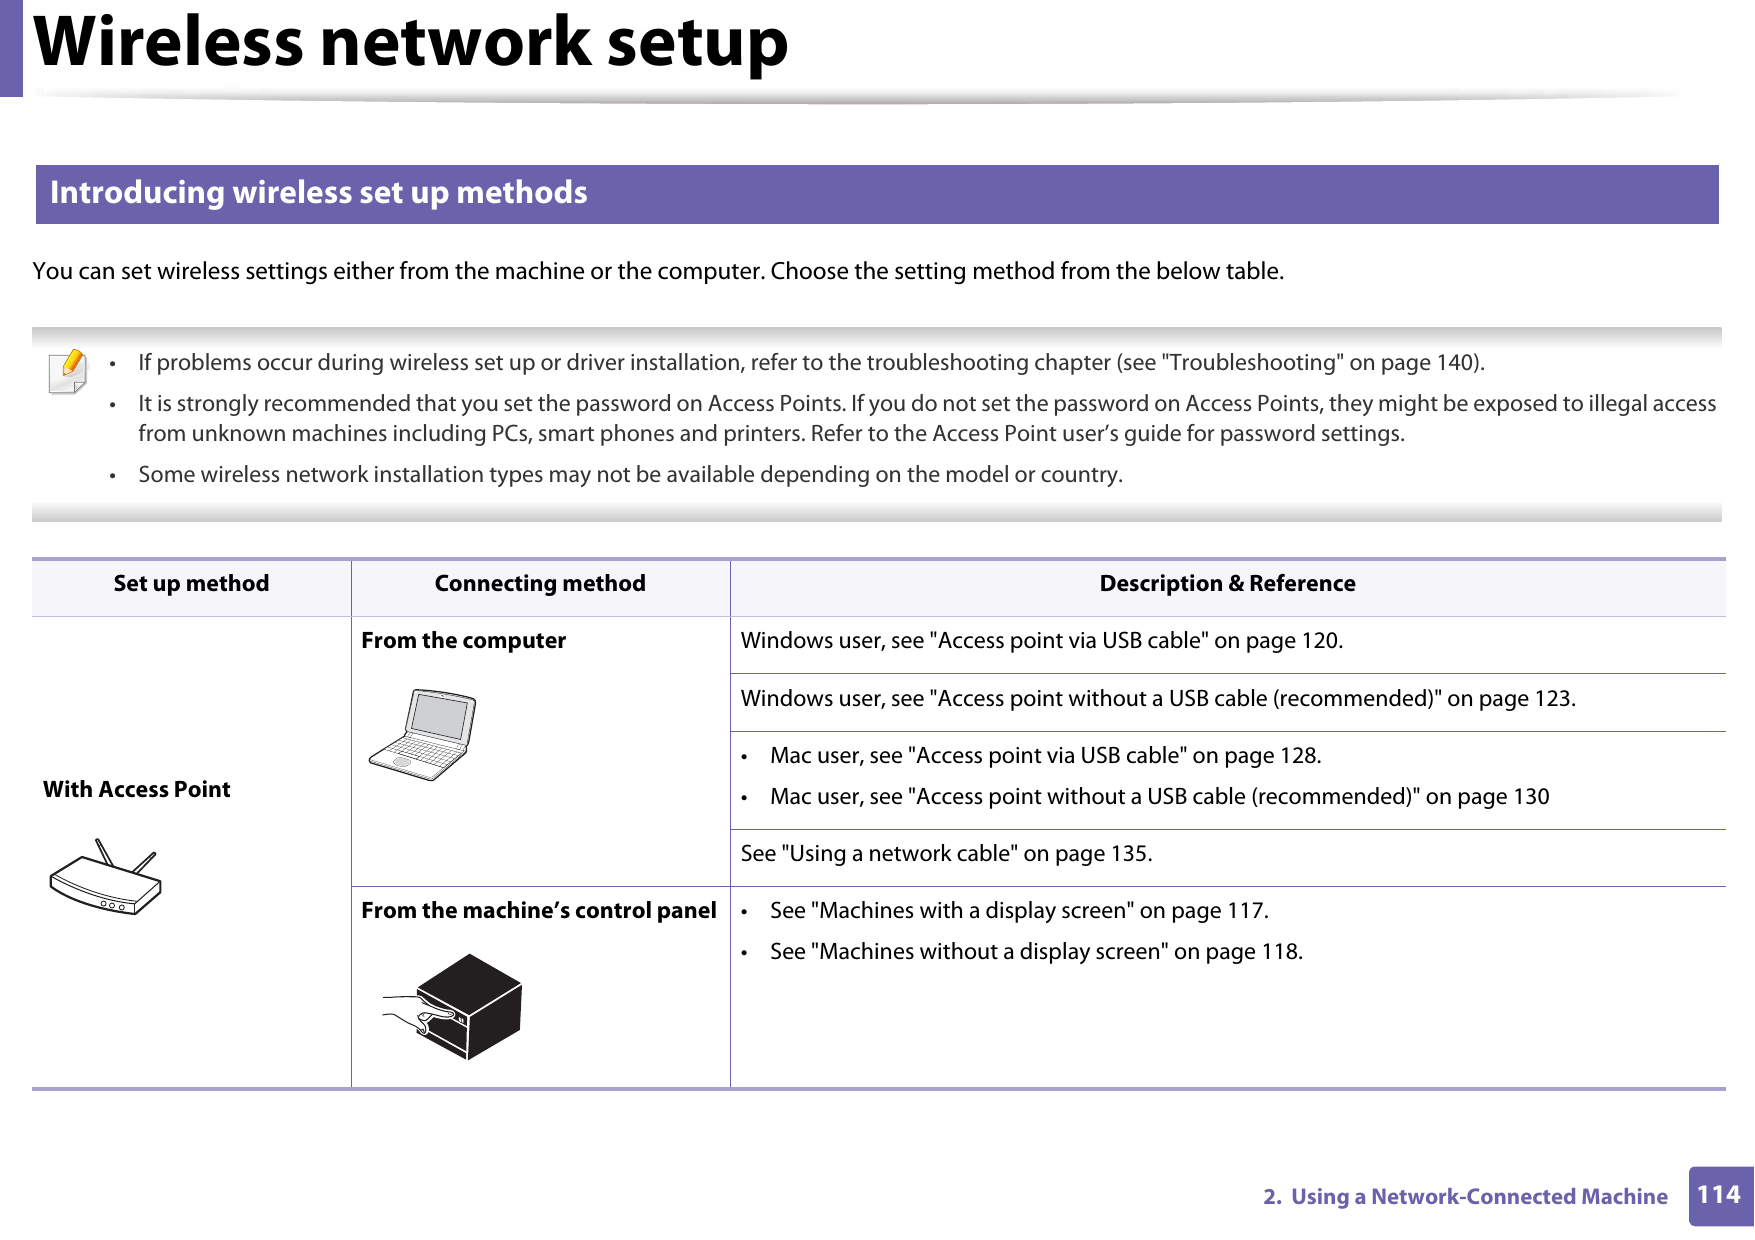 Wireless network setup1142.  Using a Network-Connected Machine12 Introducing wireless set up methodsYou can set wireless settings either from the machine or the computer. Choose the setting method from the below table. • If problems occur during wireless set up or driver installation, refer to the troubleshooting chapter (see &quot;Troubleshooting&quot; on page 140).• It is strongly recommended that you set the password on Access Points. If you do not set the password on Access Points, they might be exposed to illegal access from unknown machines including PCs, smart phones and printers. Refer to the Access Point user’s guide for password settings.• Some wireless network installation types may not be available depending on the model or country.  Set up method Connecting method Description &amp; ReferenceWith Access PointFrom the computer Windows user, see &quot;Access point via USB cable&quot; on page 120.Windows user, see &quot;Access point without a USB cable (recommended)&quot; on page 123.• Mac user, see &quot;Access point via USB cable&quot; on page 128.• Mac user, see &quot;Access point without a USB cable (recommended)&quot; on page 130See &quot;Using a network cable&quot; on page 135.From the machine’s control panel • See &quot;Machines with a display screen&quot; on page 117.• See &quot;Machines without a display screen&quot; on page 118.